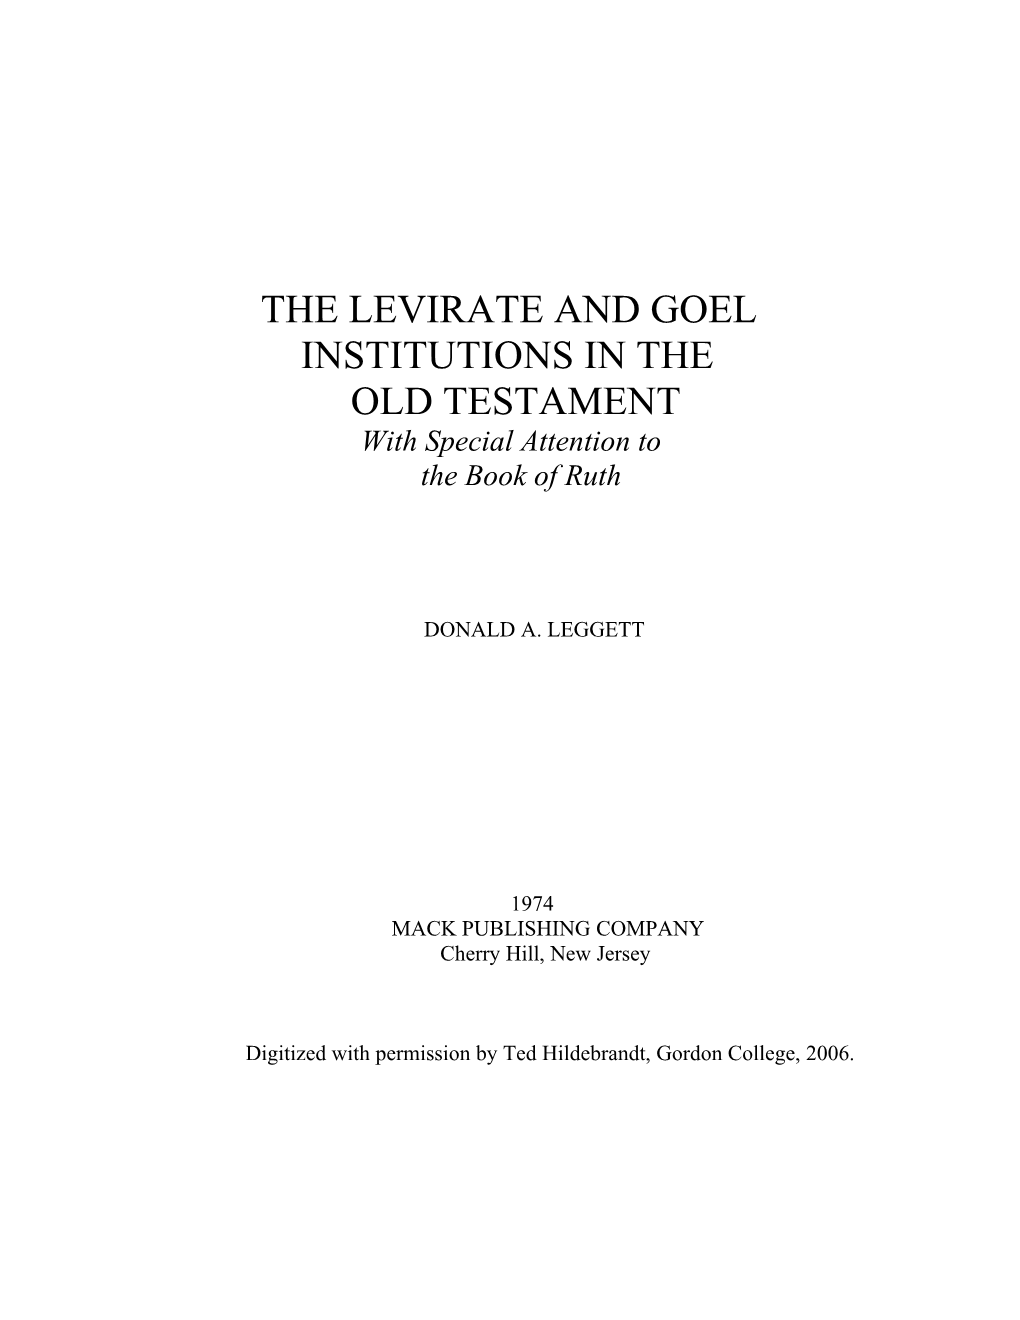 The Levirate and Goel Institutions in the Old Testament: with Special Attention to The